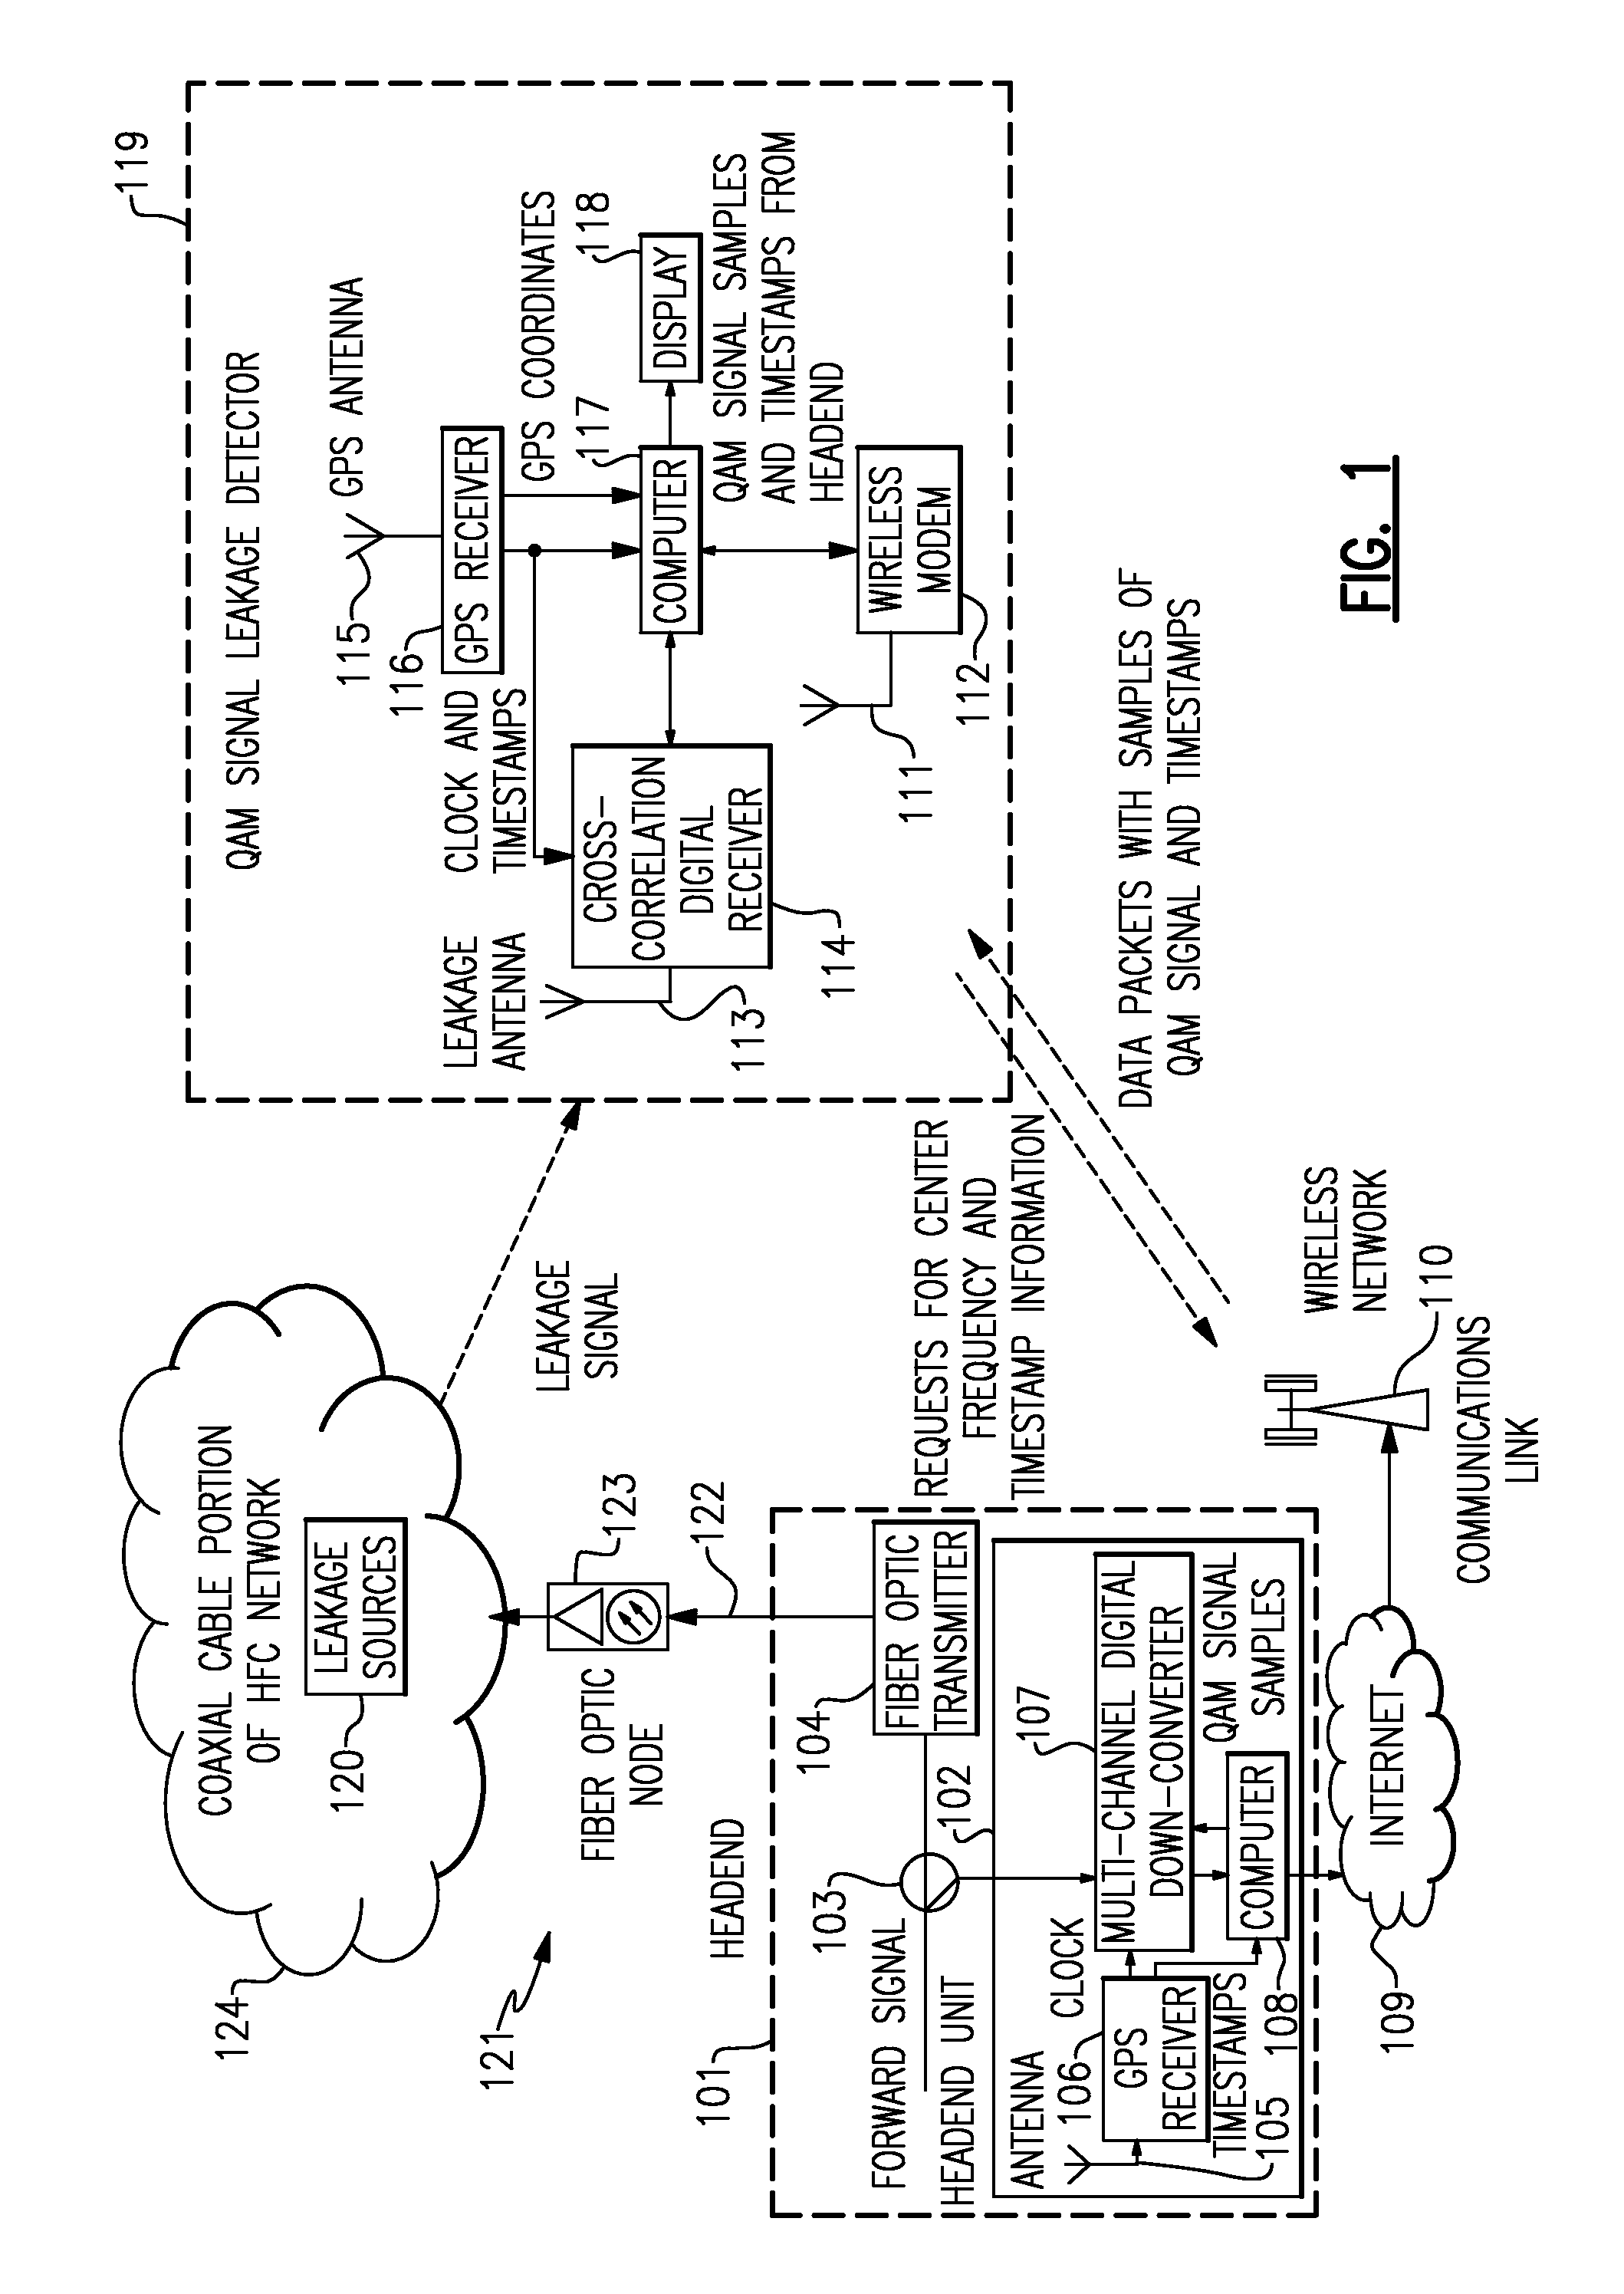 Methods and apparatus for detecting and locating leakage of digital signals